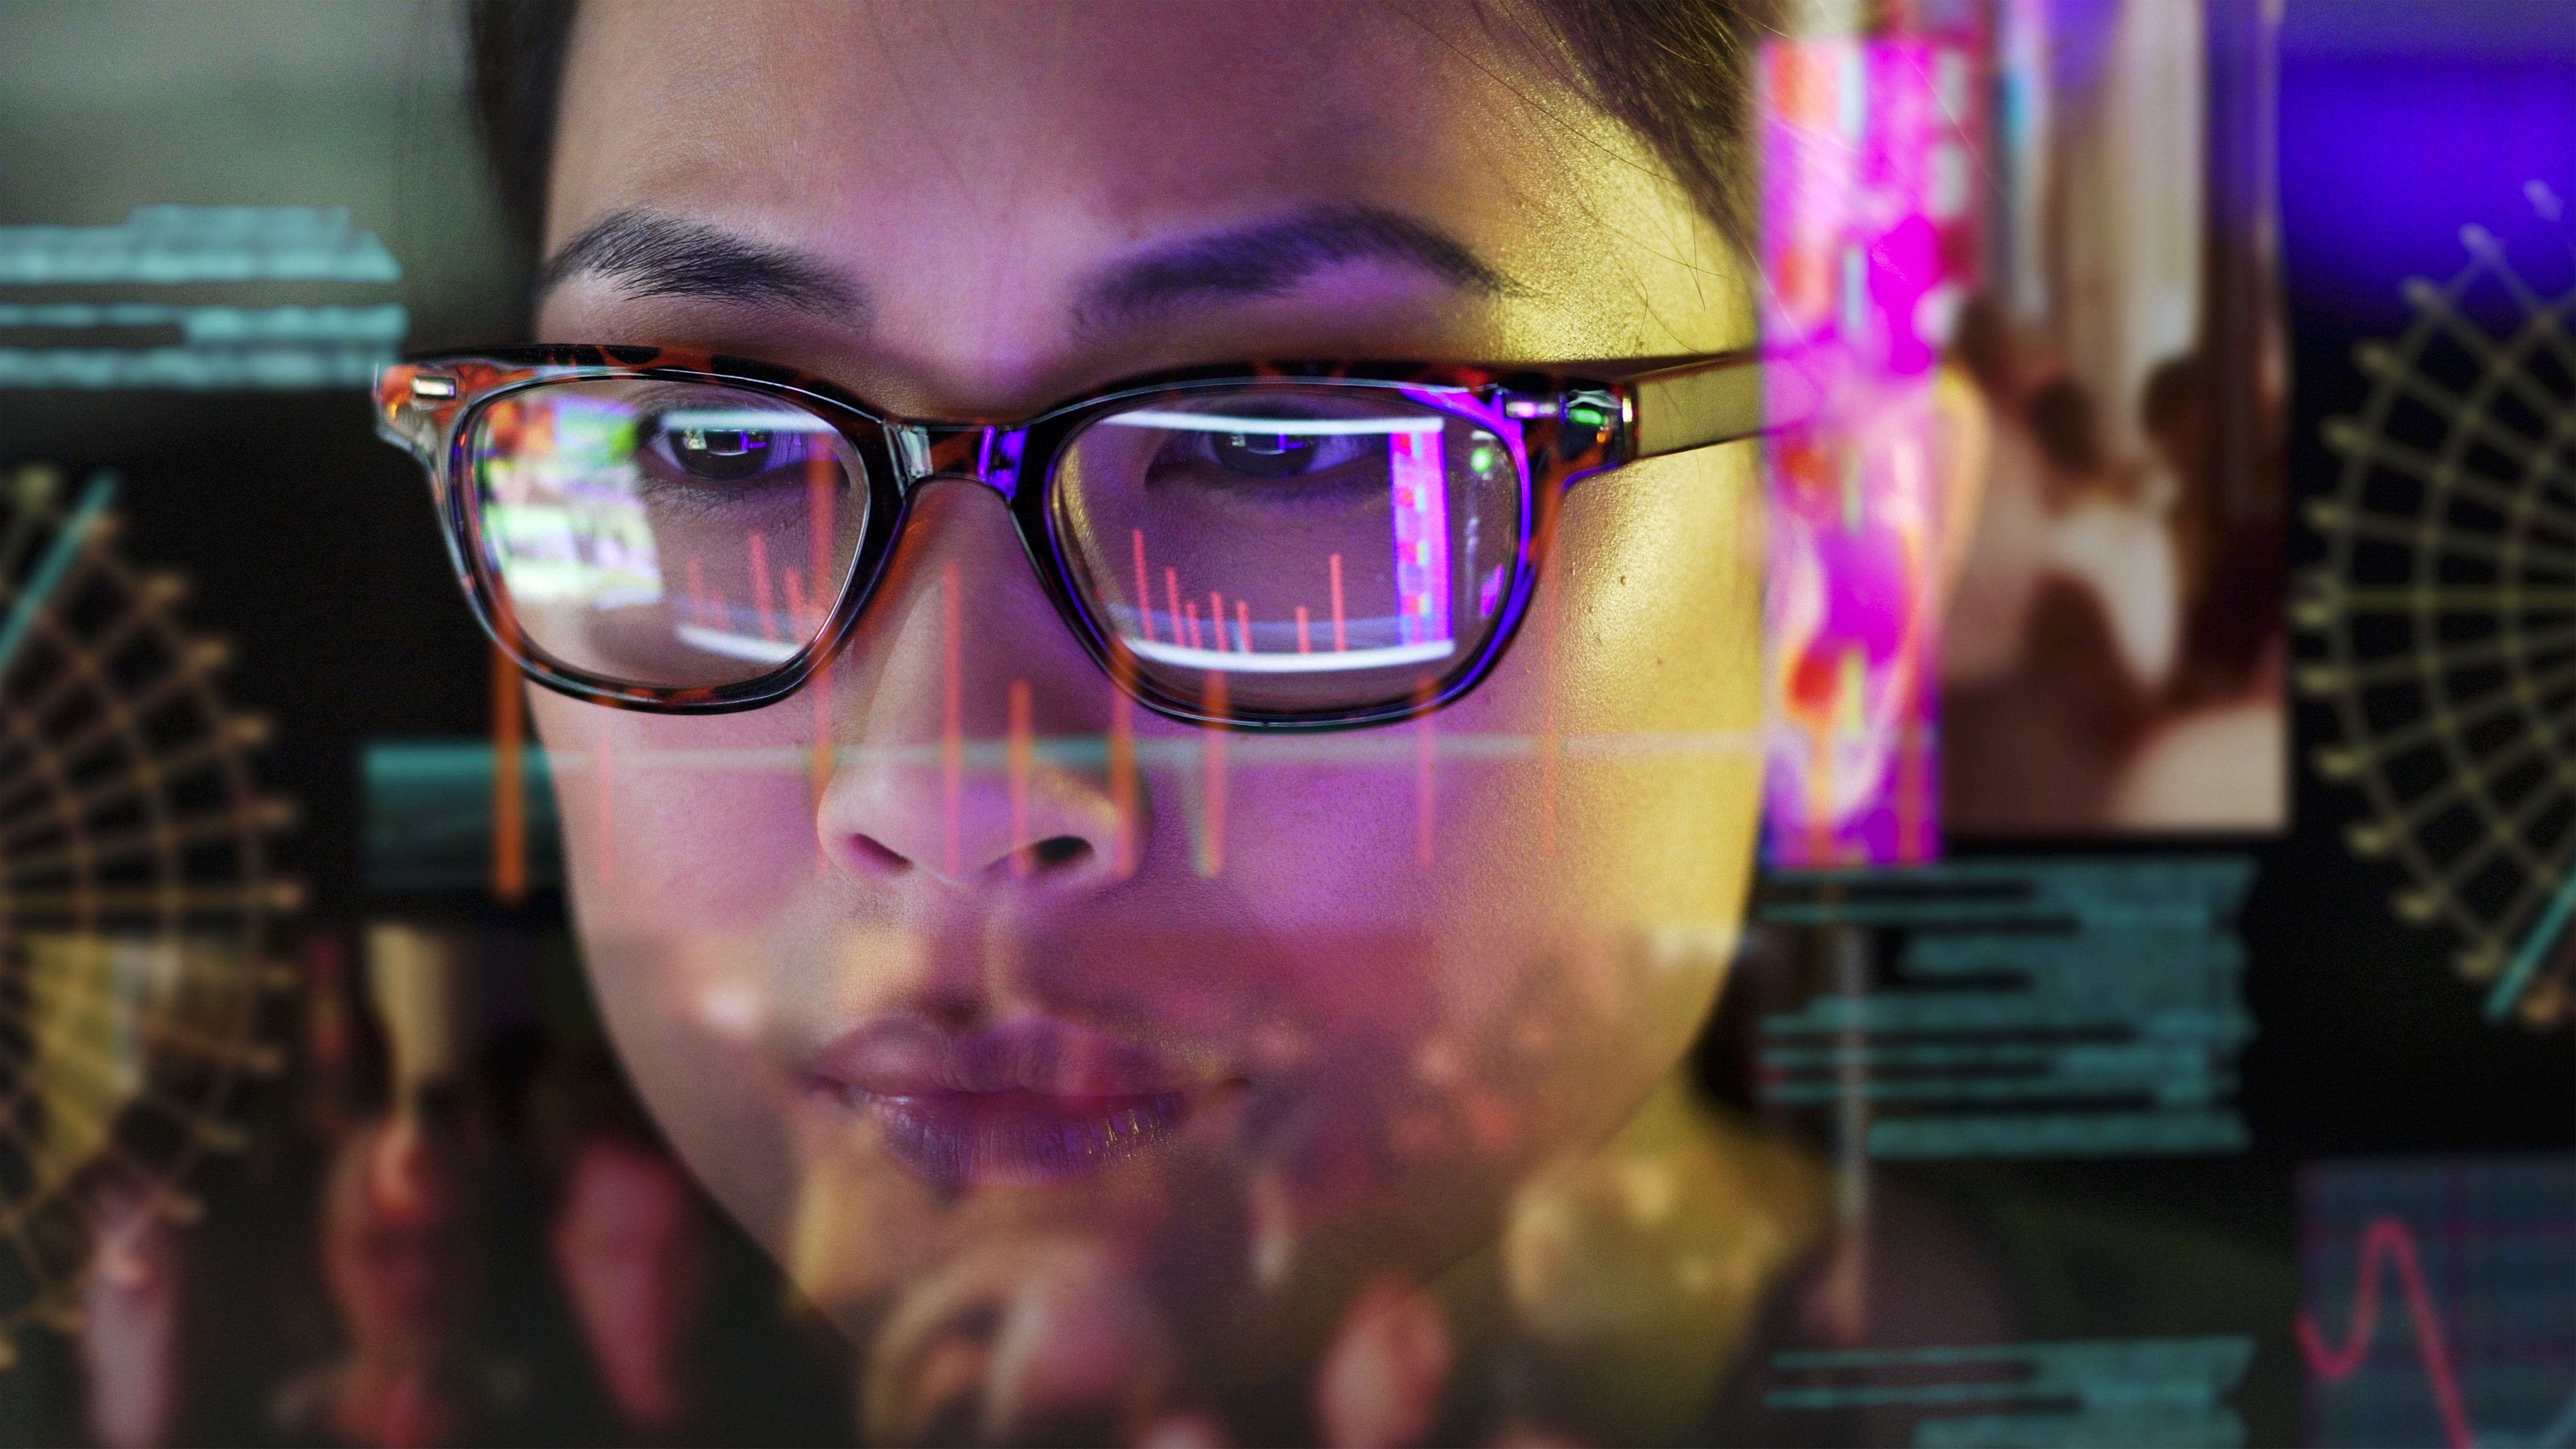 Close up stock photo of a woman carefully studying moving data on her computer screen, the screen is unusual as it is transparent and the camera is looking through the back of the screen.